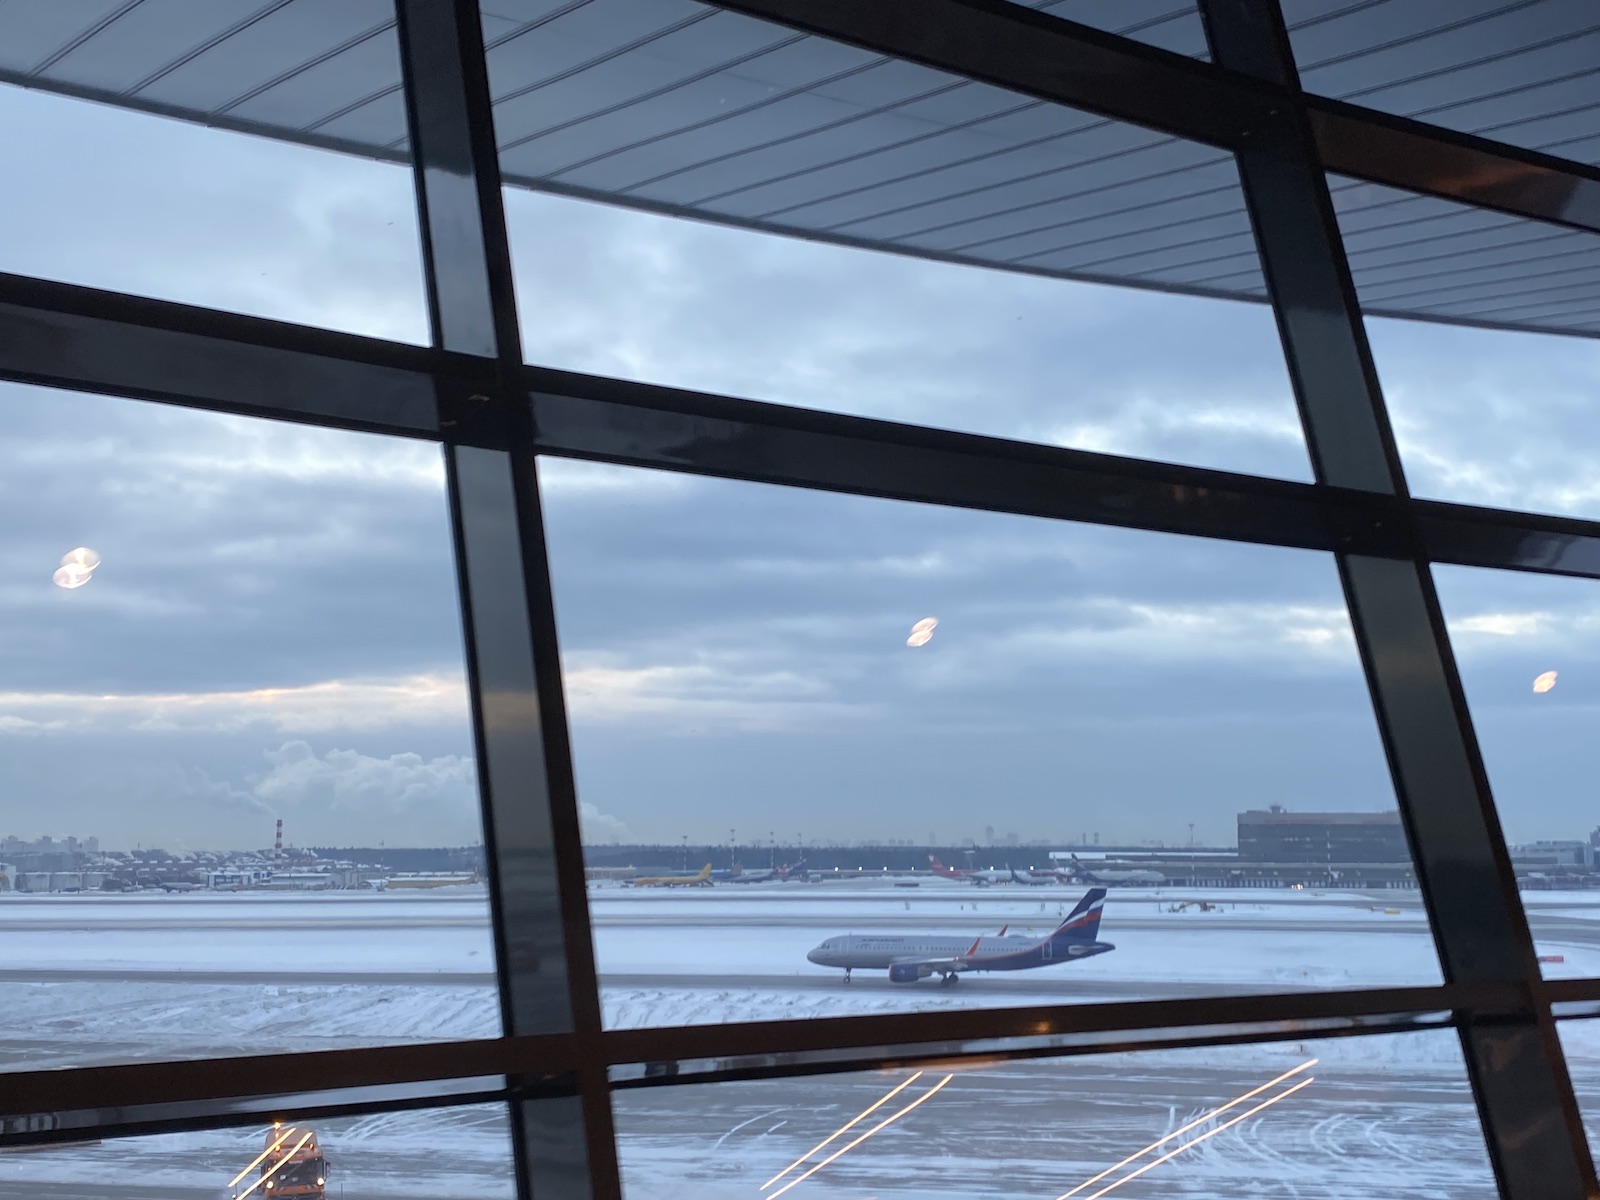 Planespotting in Moscow, image of snowy runway and planes